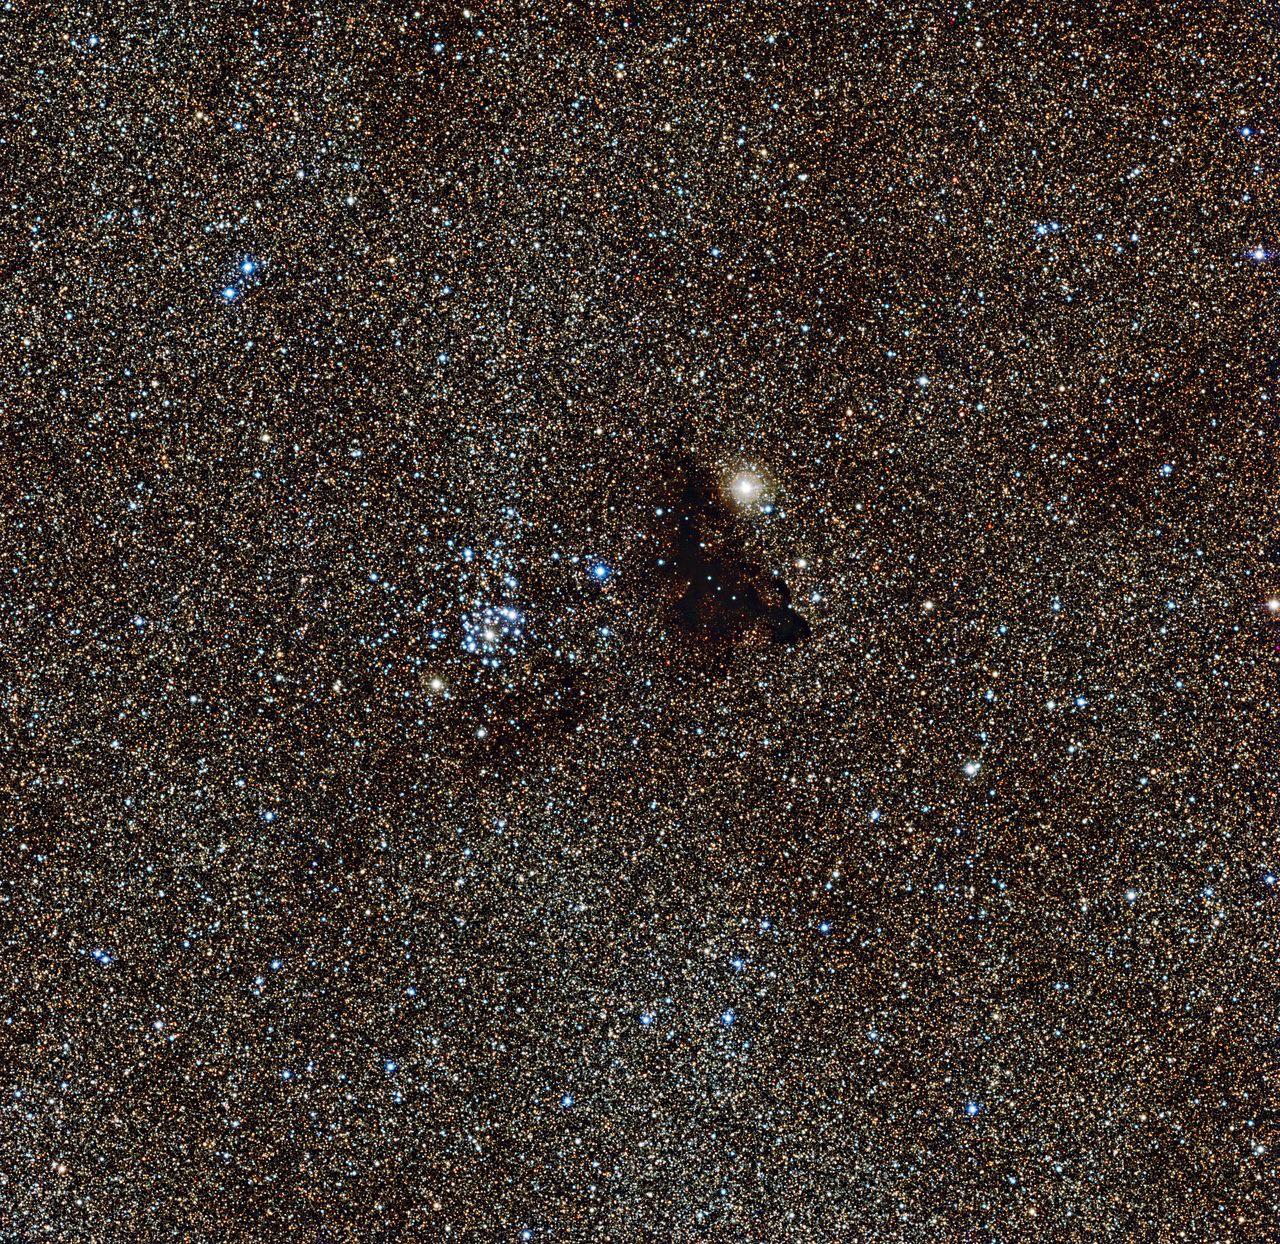 Star cluster NGC 6520 and Barnard 86, a strangely dark gas cloud. Zoom in and you’re actually able to see countless individual stars. Keep in mind, each star is still light years apart from each other.